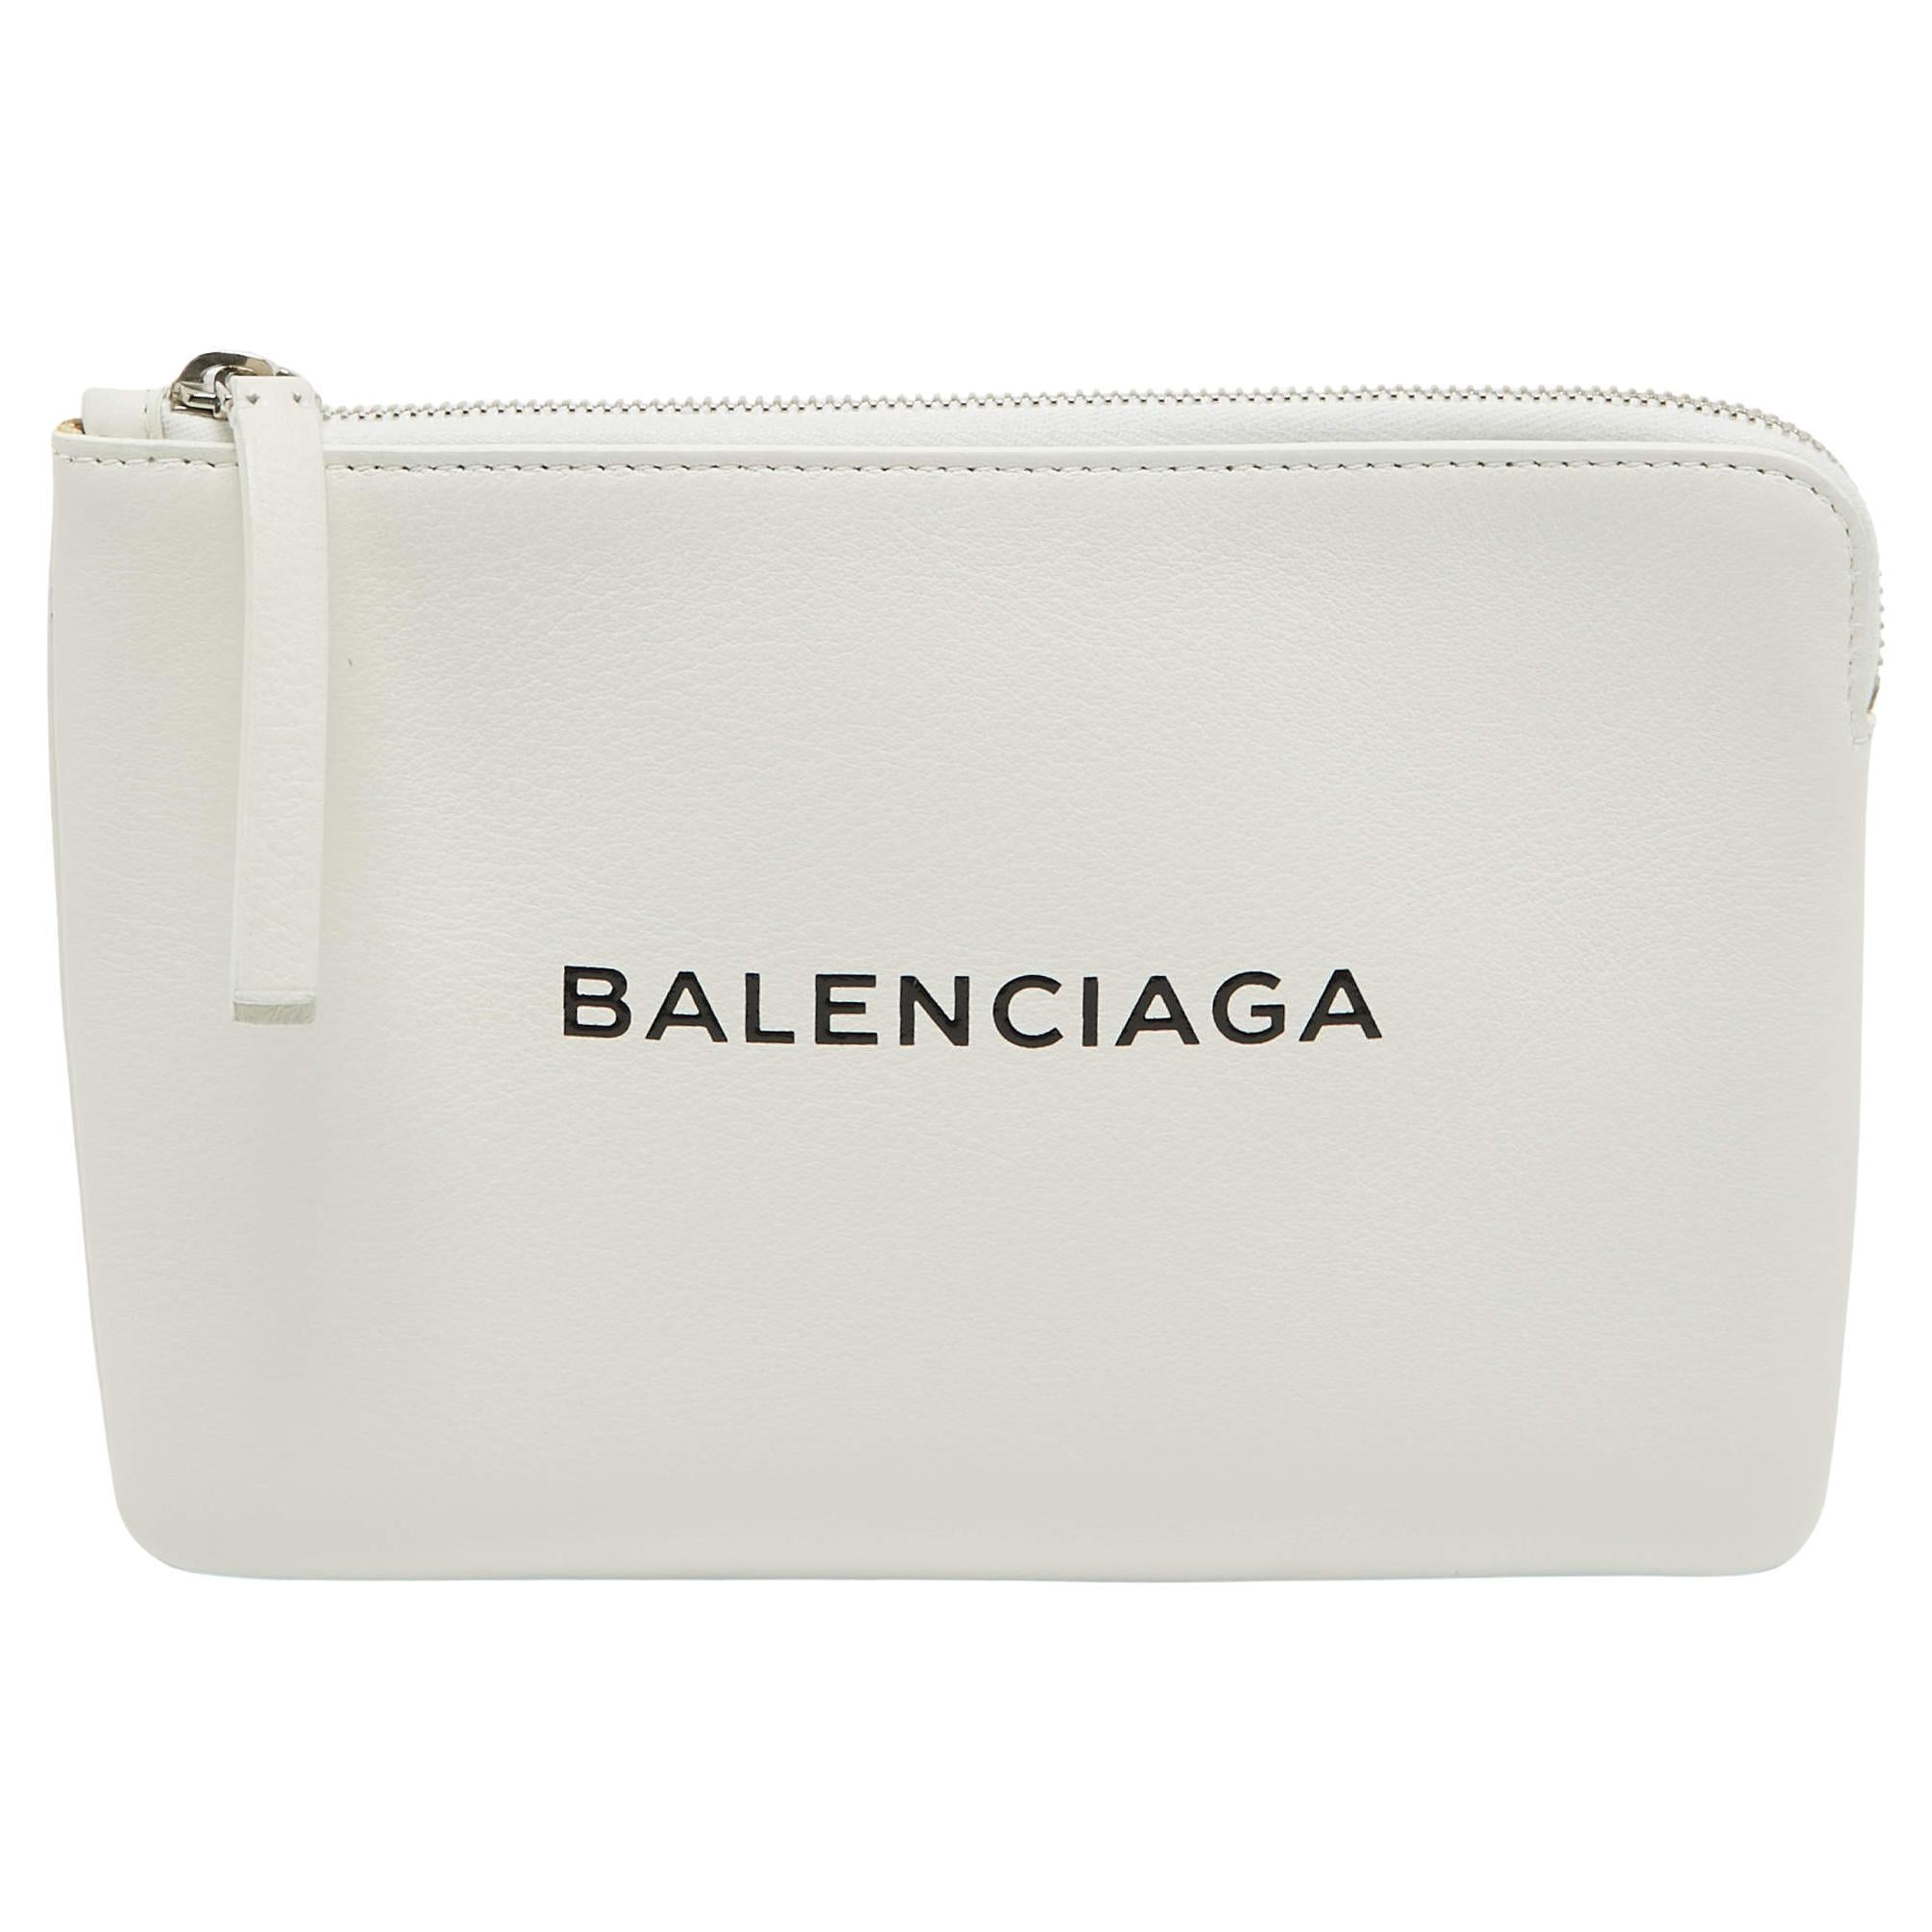 Balenciaga White Leather Zip Pouch For Sale